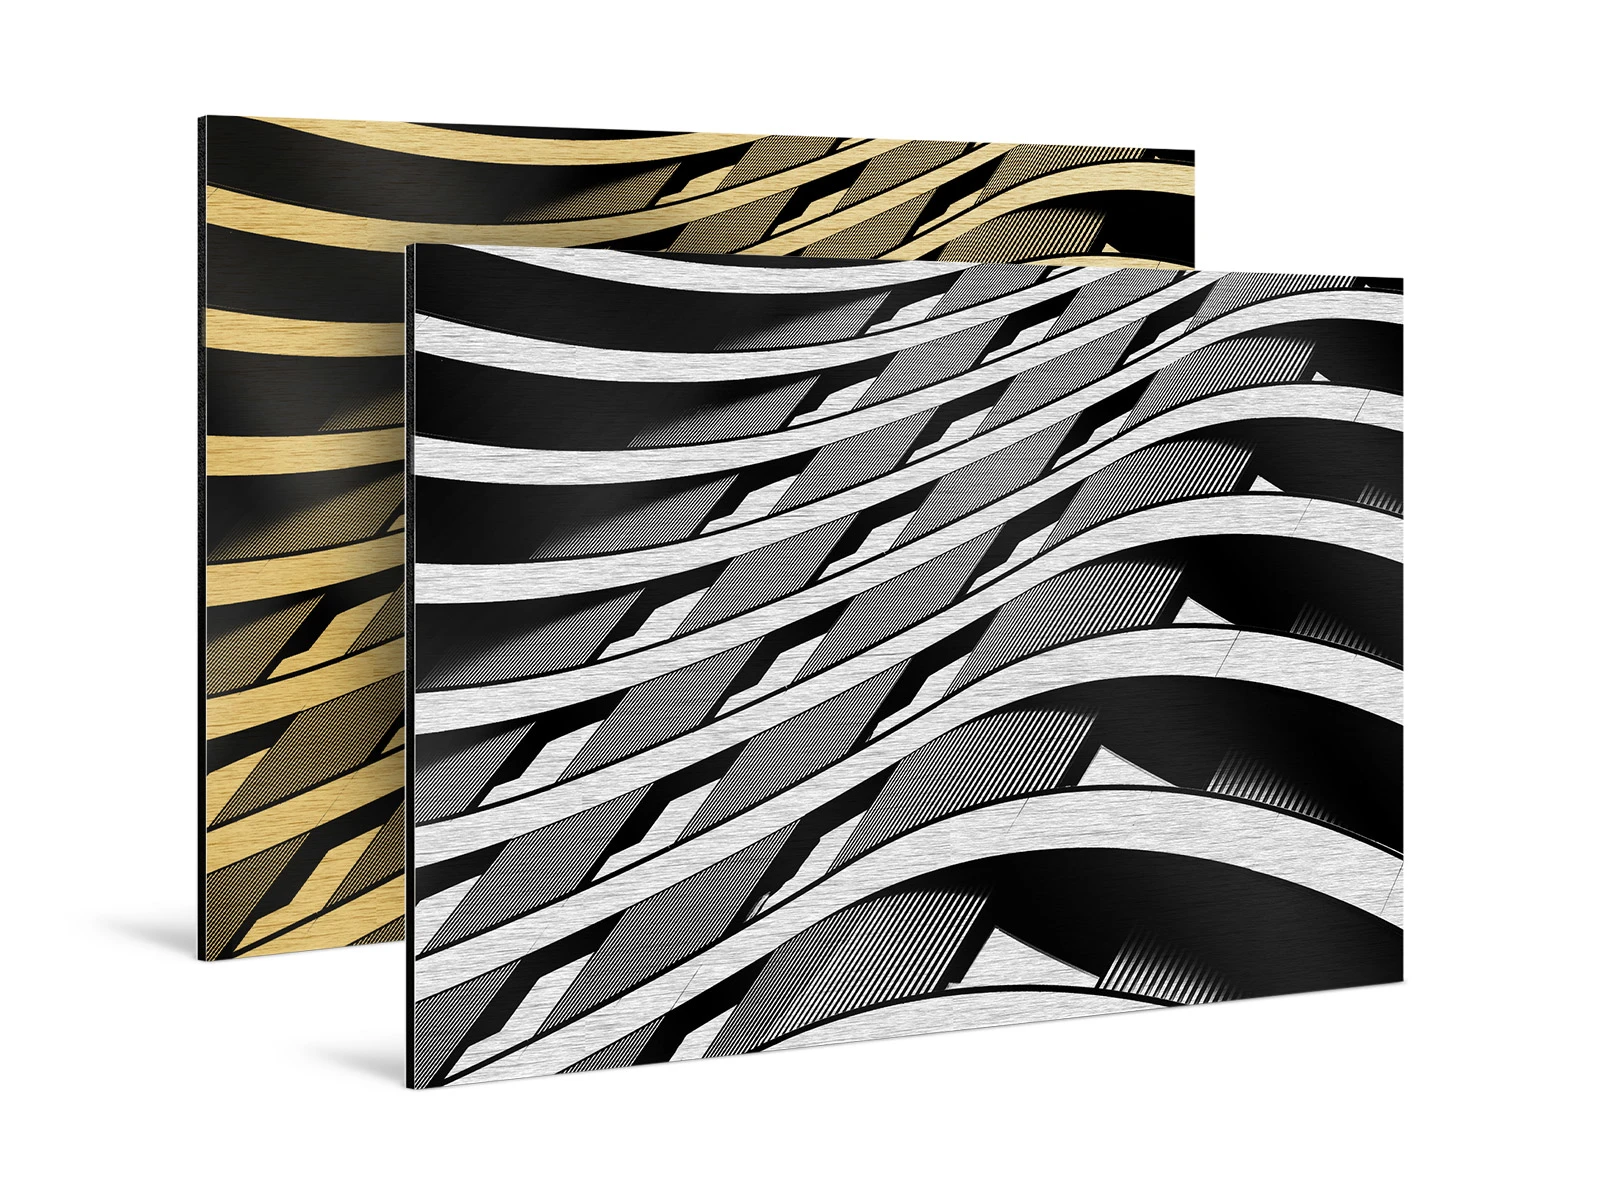 House facade on a Direct Print on brushed Aluminium, one printed in silver and one in gold.